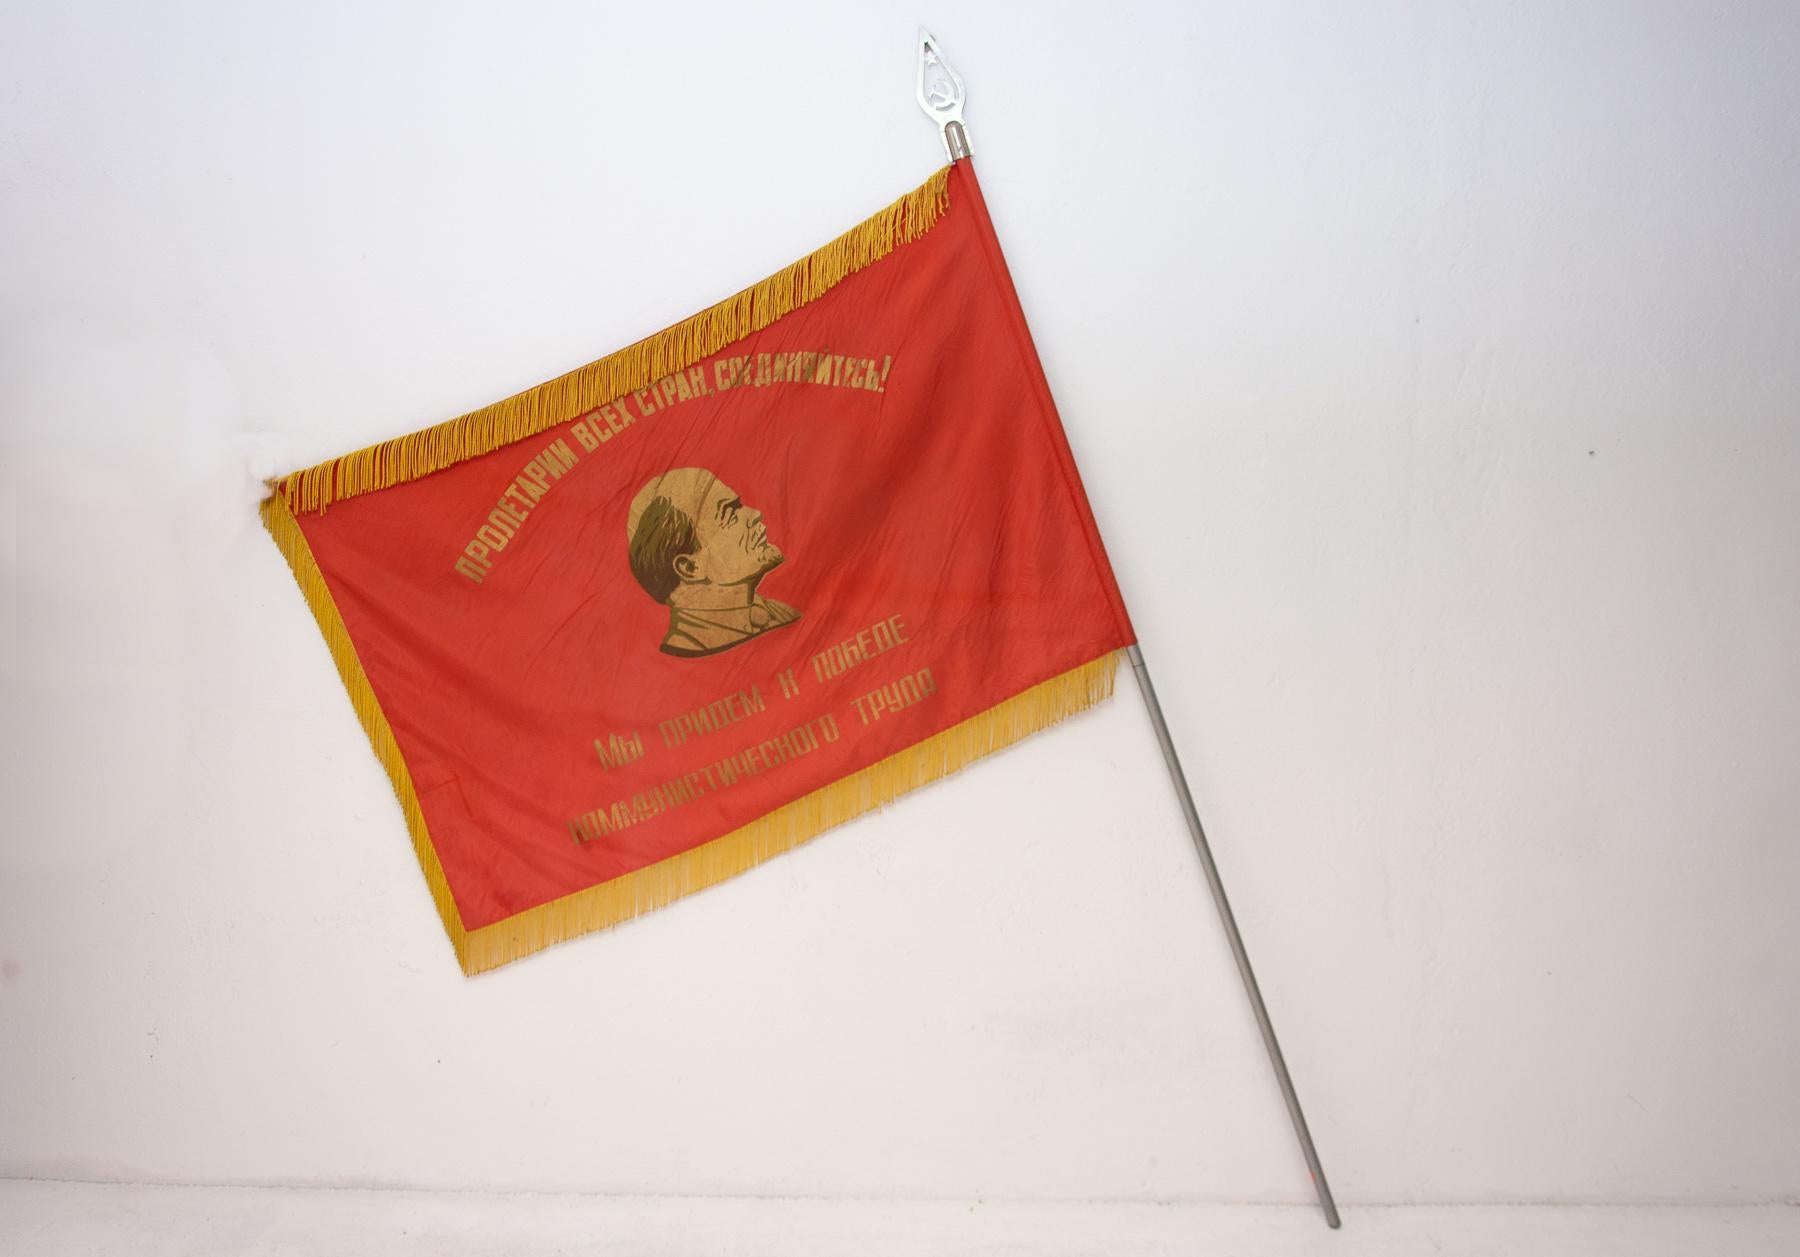 Old original flag from 1950s with a portrait of Vladimir Ilyich Lenin. The slogan  - “Proletarians of all countries unite!” is written on the flag.
The flag is in very good condition, it was torn in one place, but the seam is repaired. It is made of